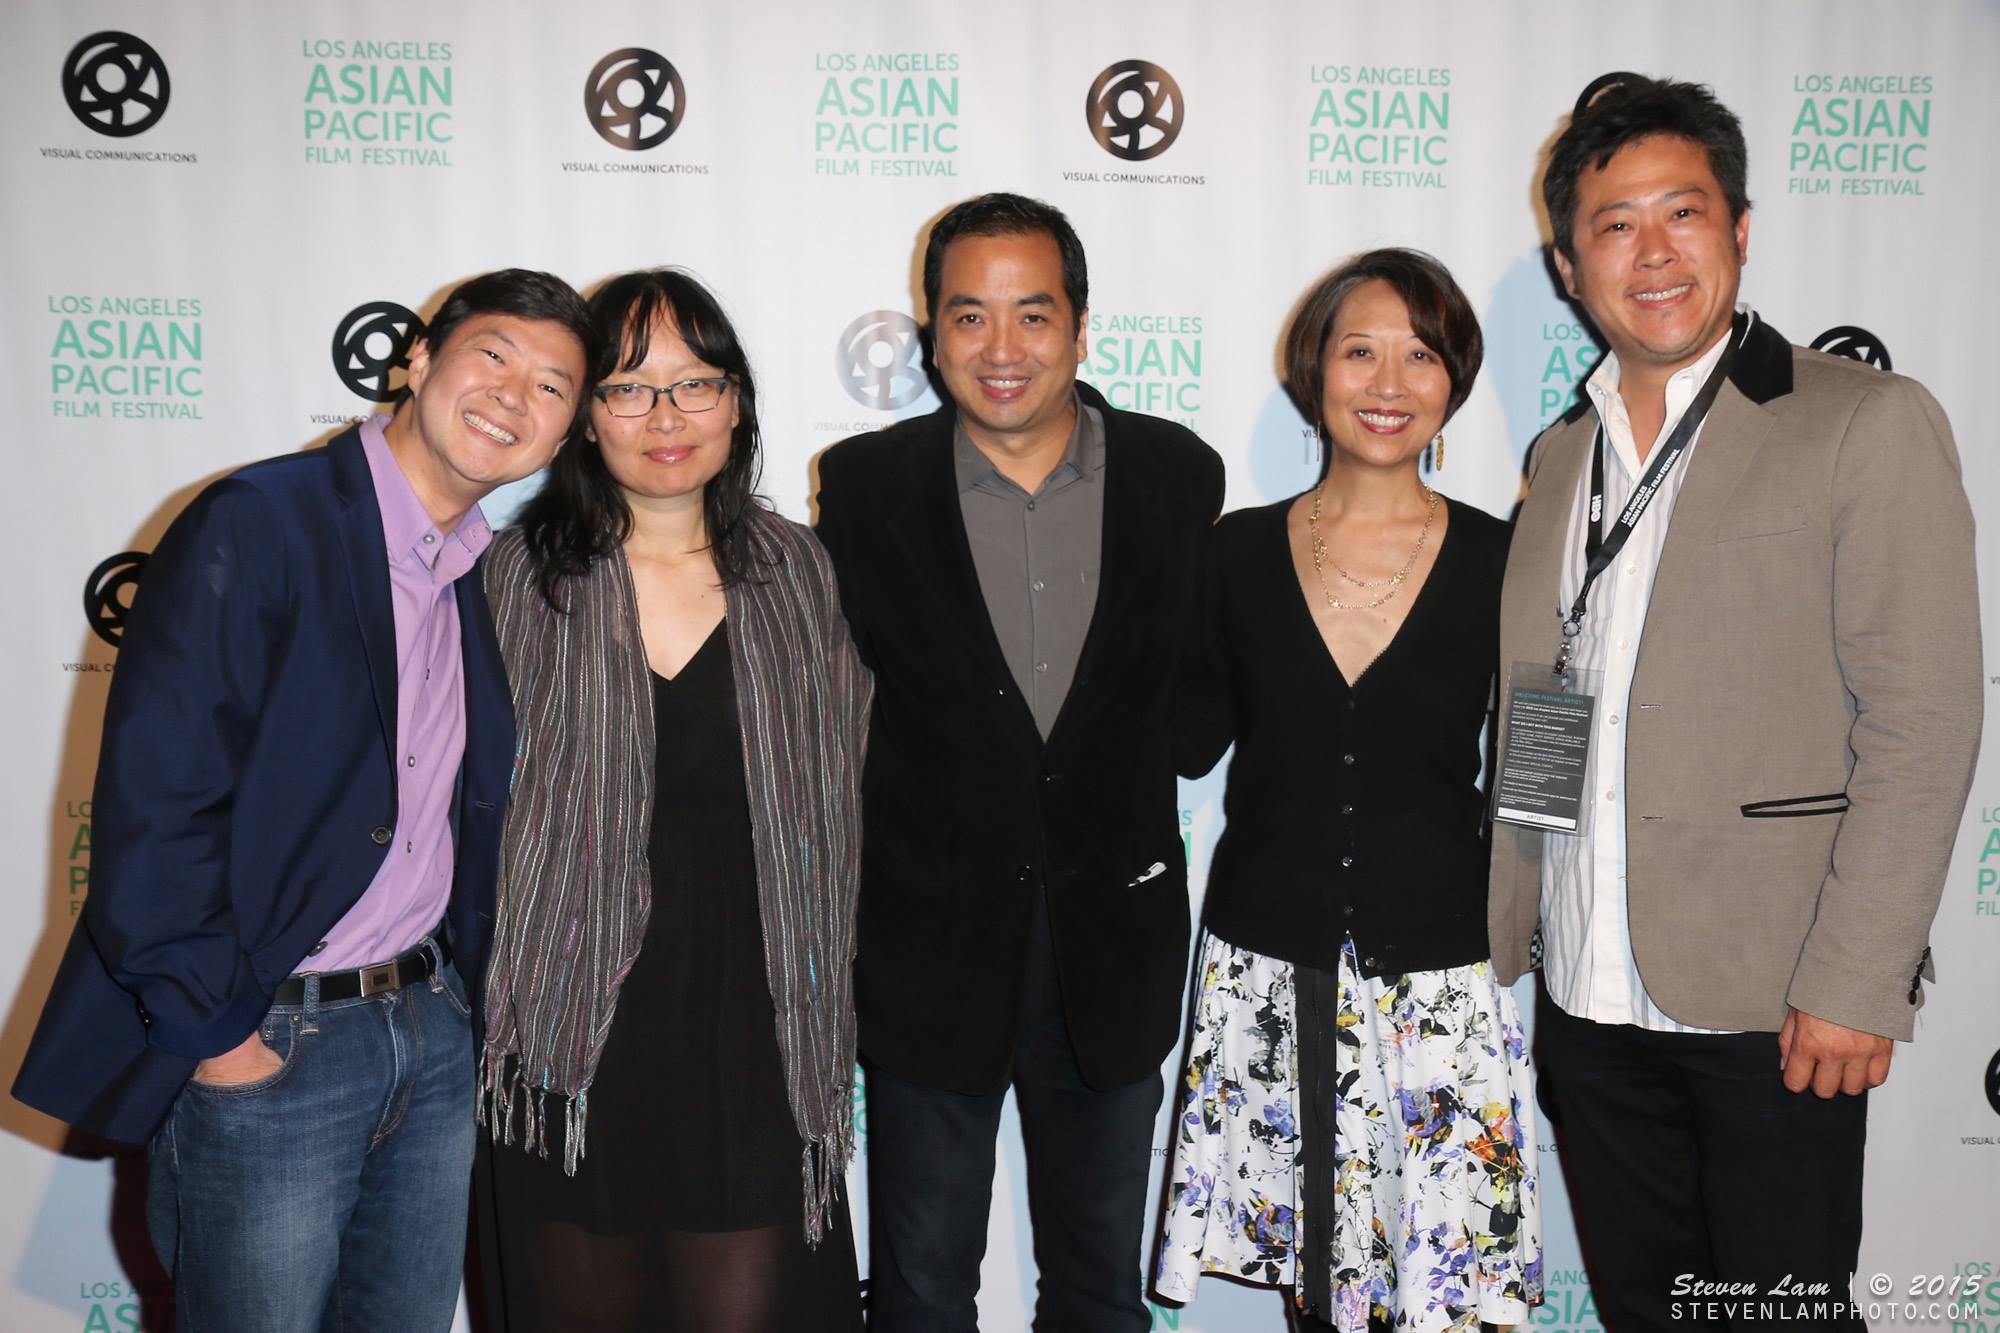 Opening Night of ADVANTAGEOUS at 2015 Los Angeles Asian Pacific Film Festival. Left to Right: Actor-producer Ken Jeong, director & co-writer Jennifer Phang, producer Robert Chang, actor Jeanne Sakata, composer Timo Chen